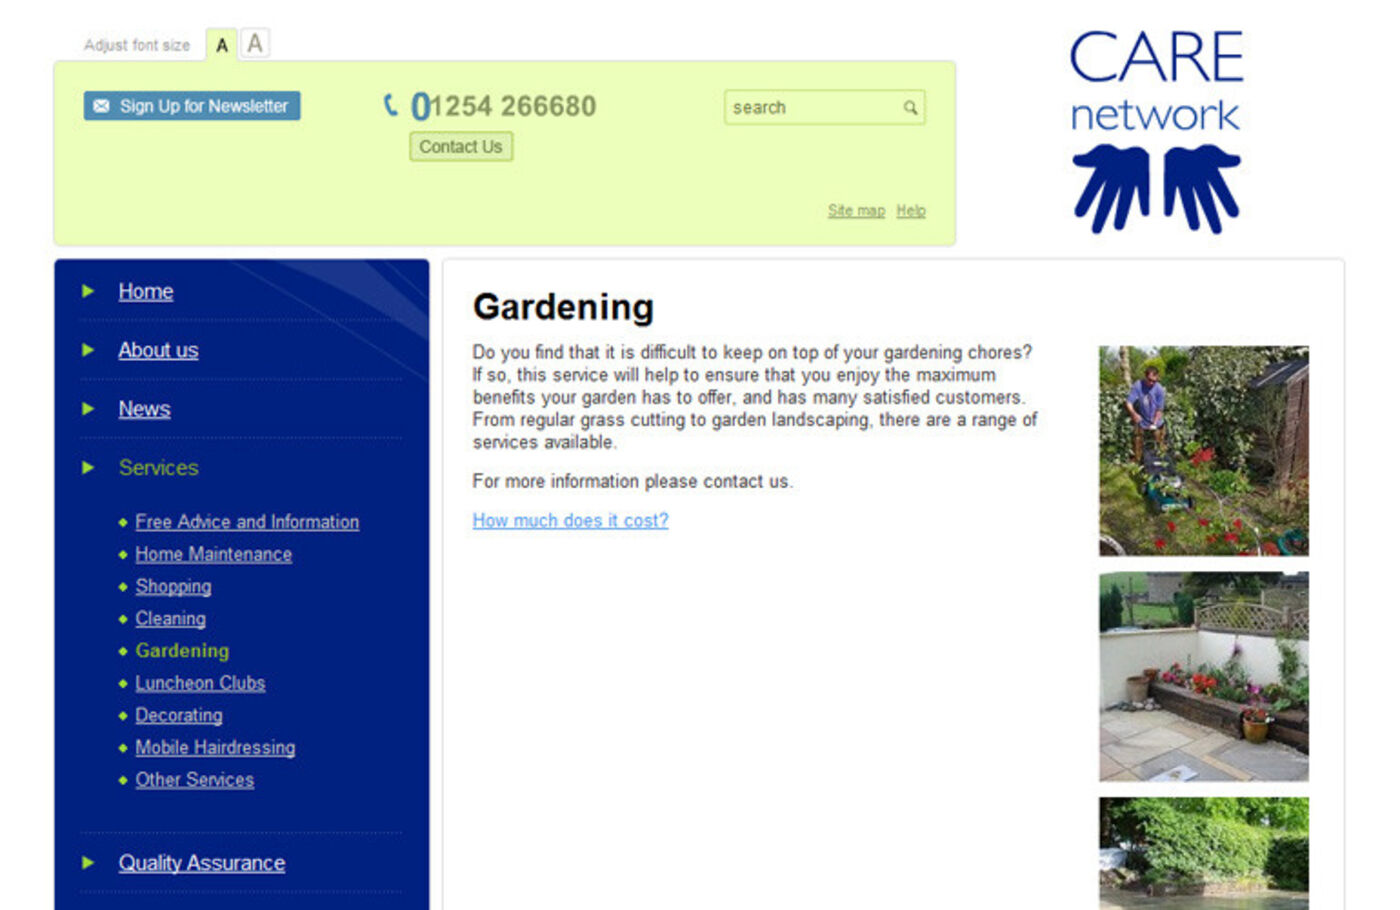 Care Network Services of Gardening